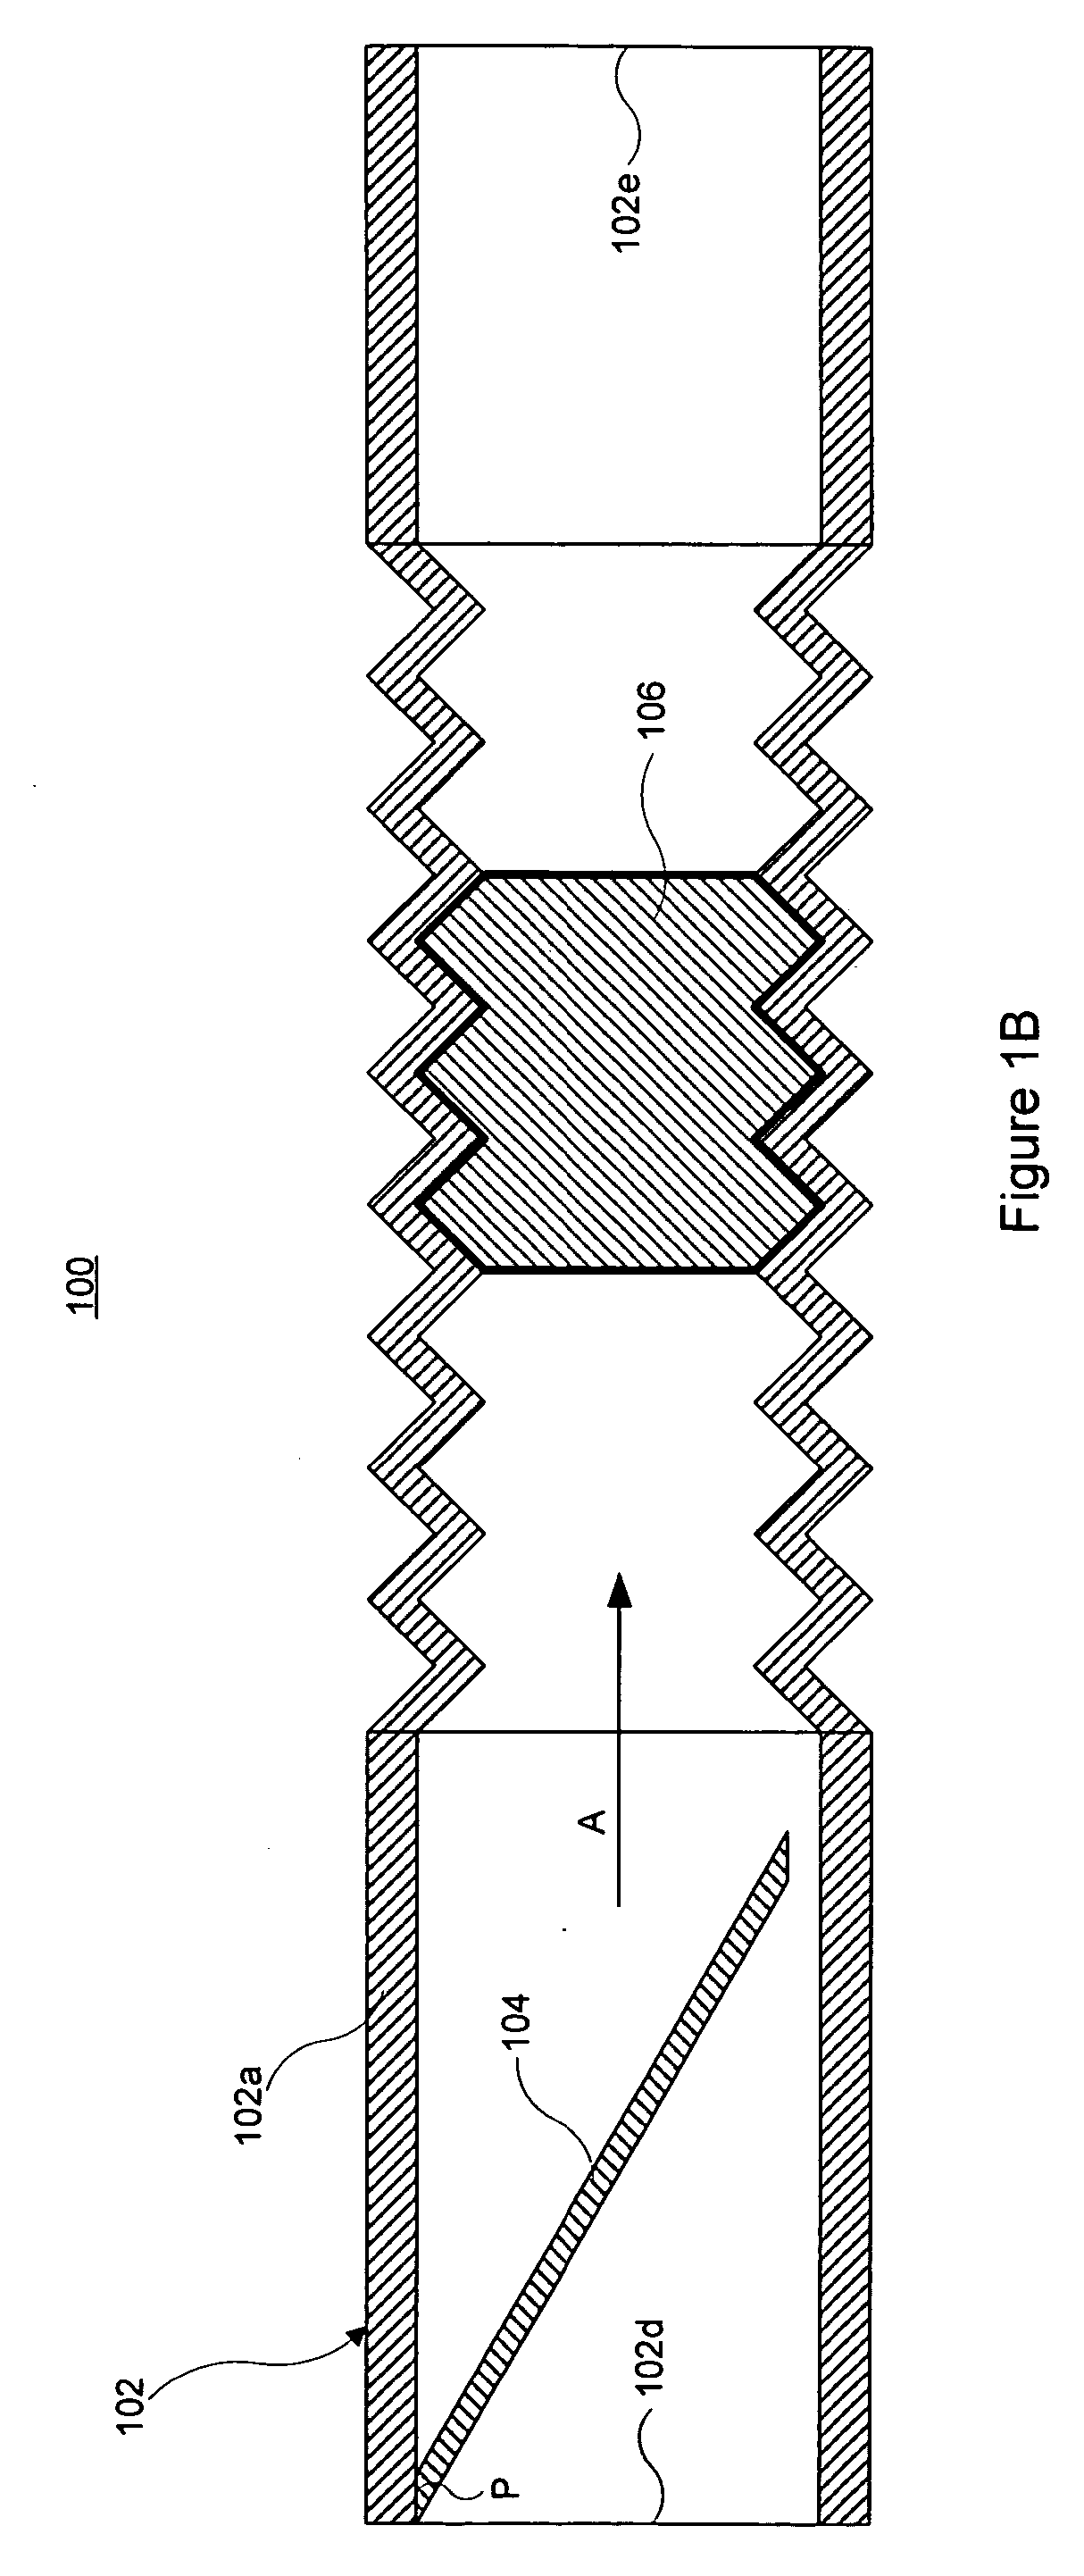 Device and method for inducing sputum and collecting samples